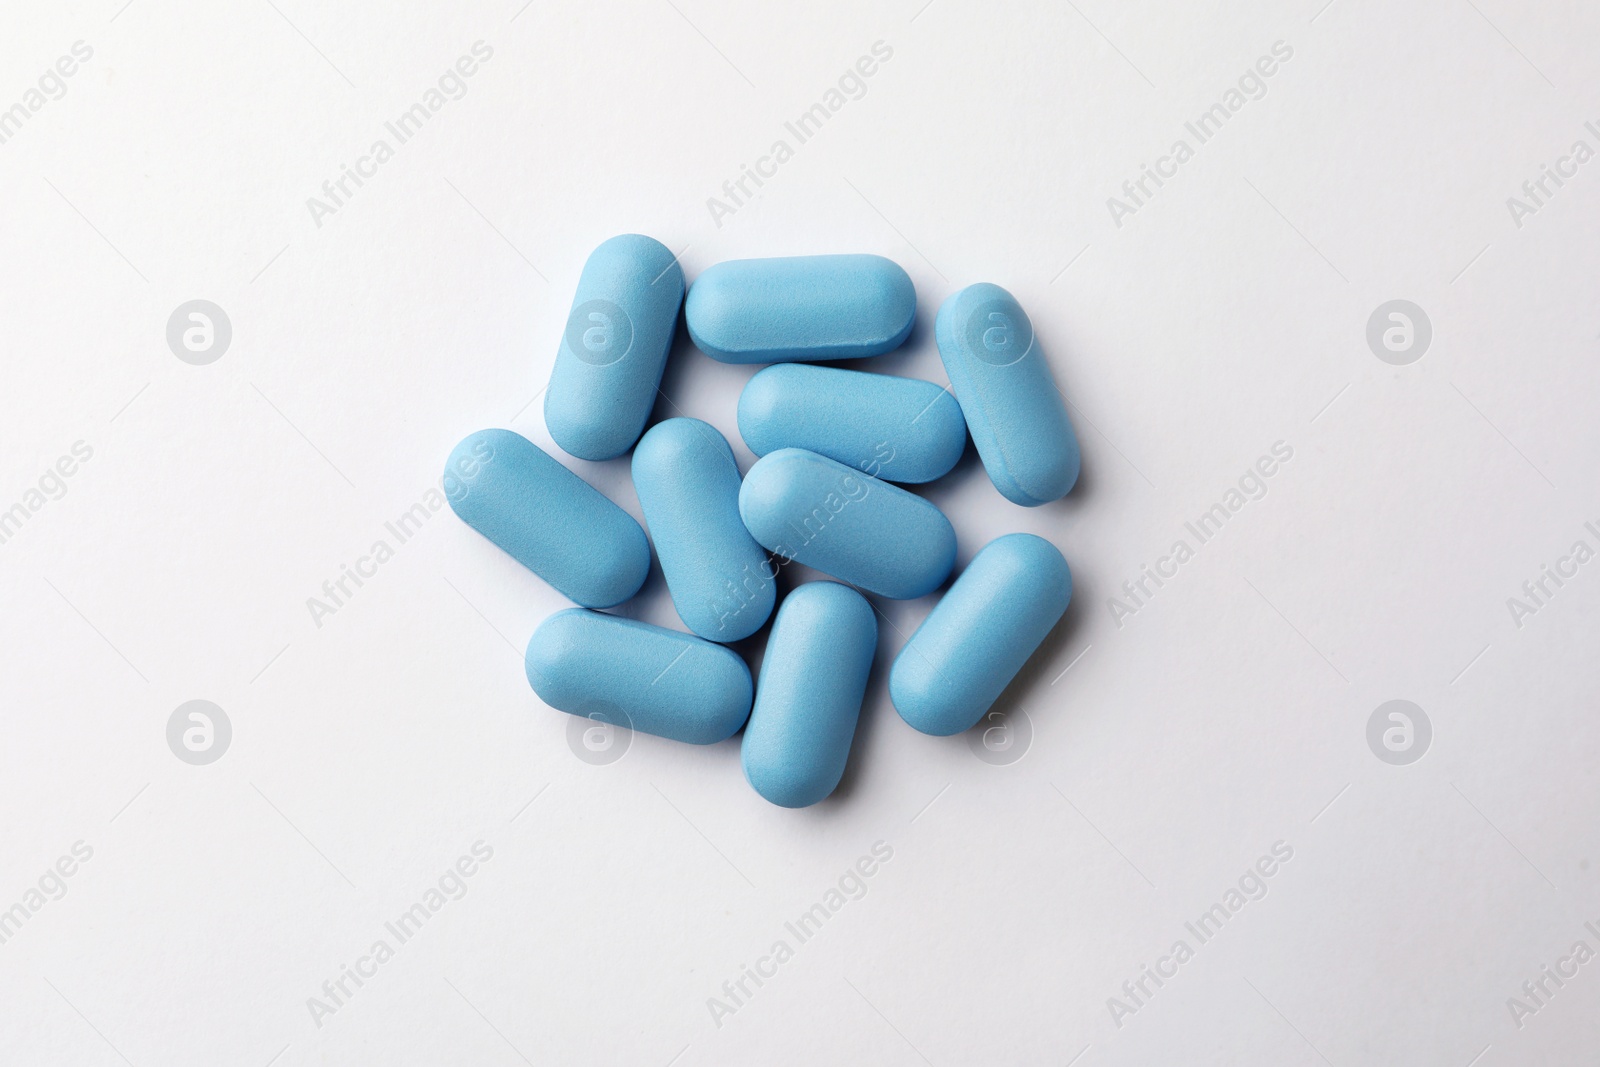 Photo of Pills on white background, top view. Potency problem